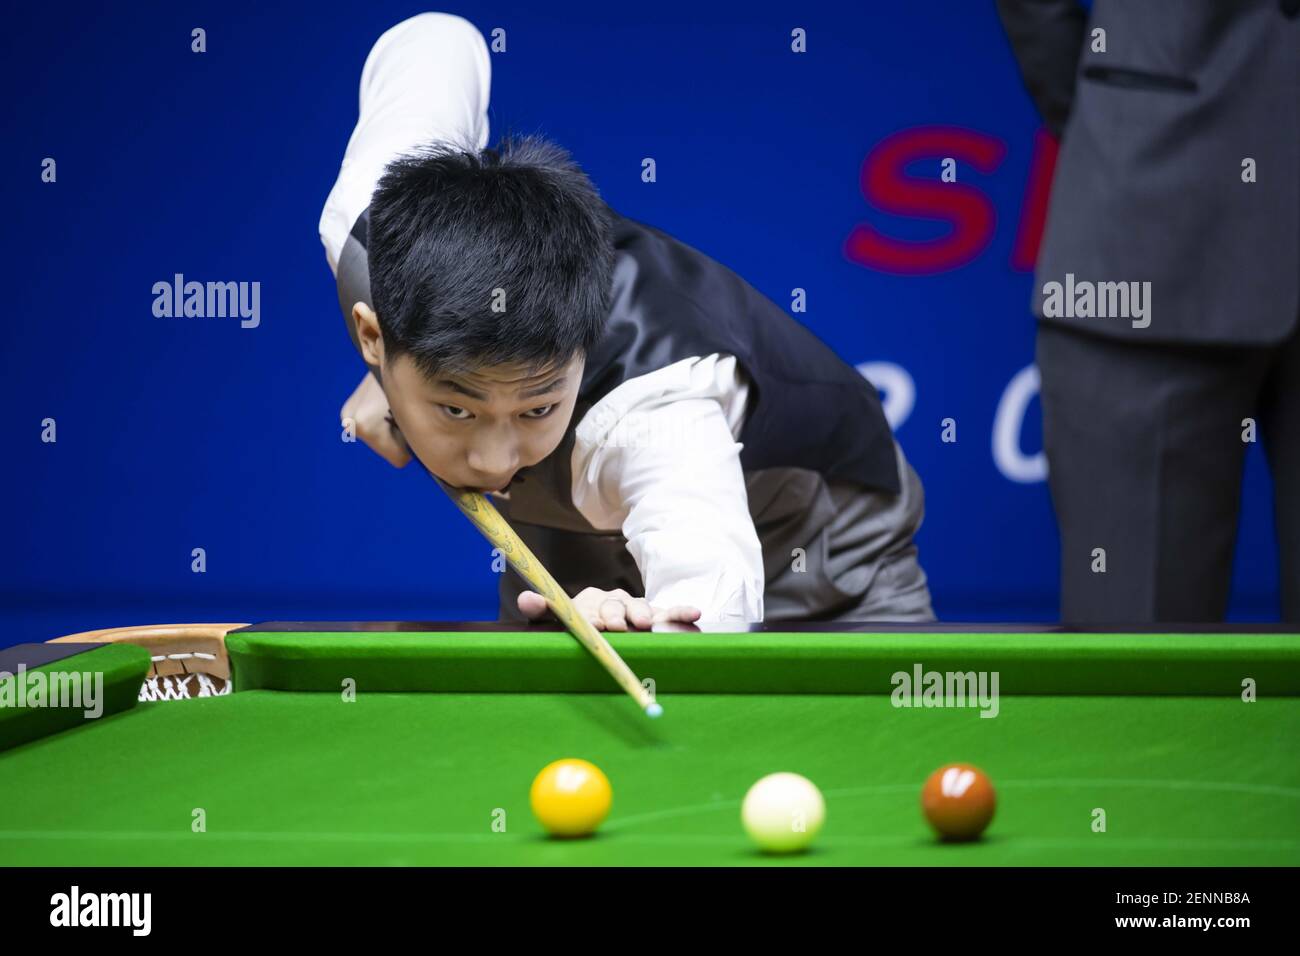 Chinese professional snooker player Wu Haotian plays a shot at the Round 1 of 2019 Snooker